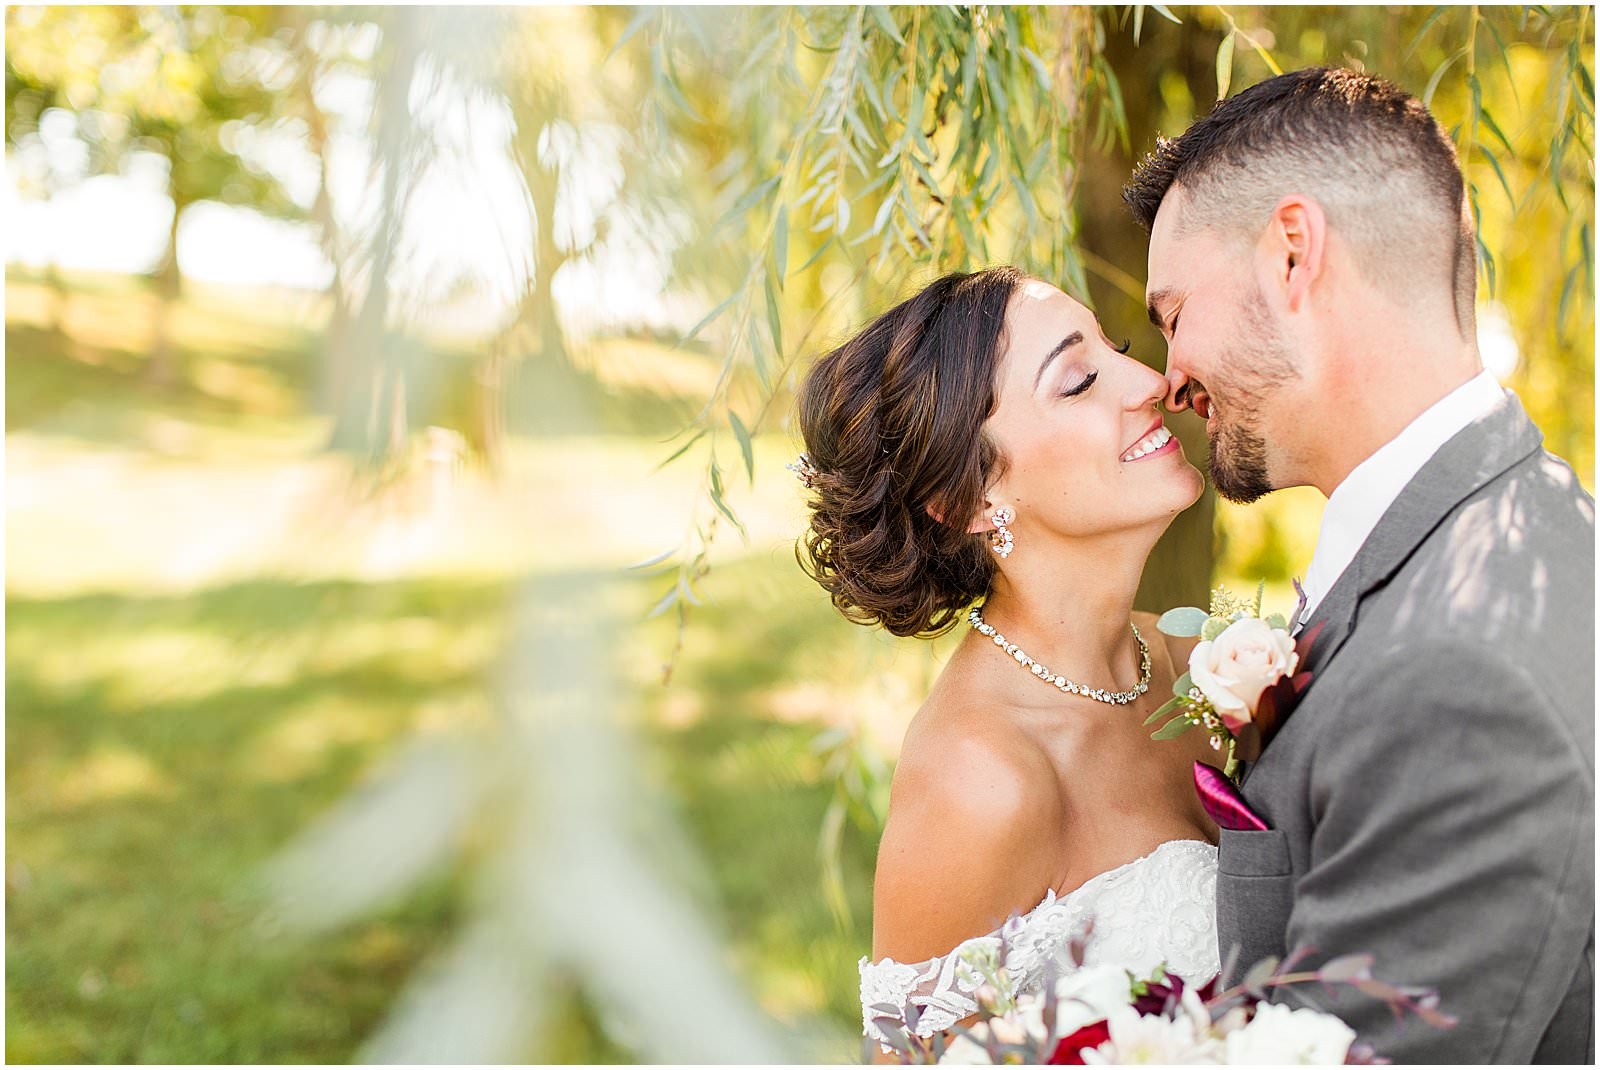 A Stunning Fall Wedding in Indianapolis, IN |. Sally and Andrew | Bret and Brandie Photography 0063.jpg